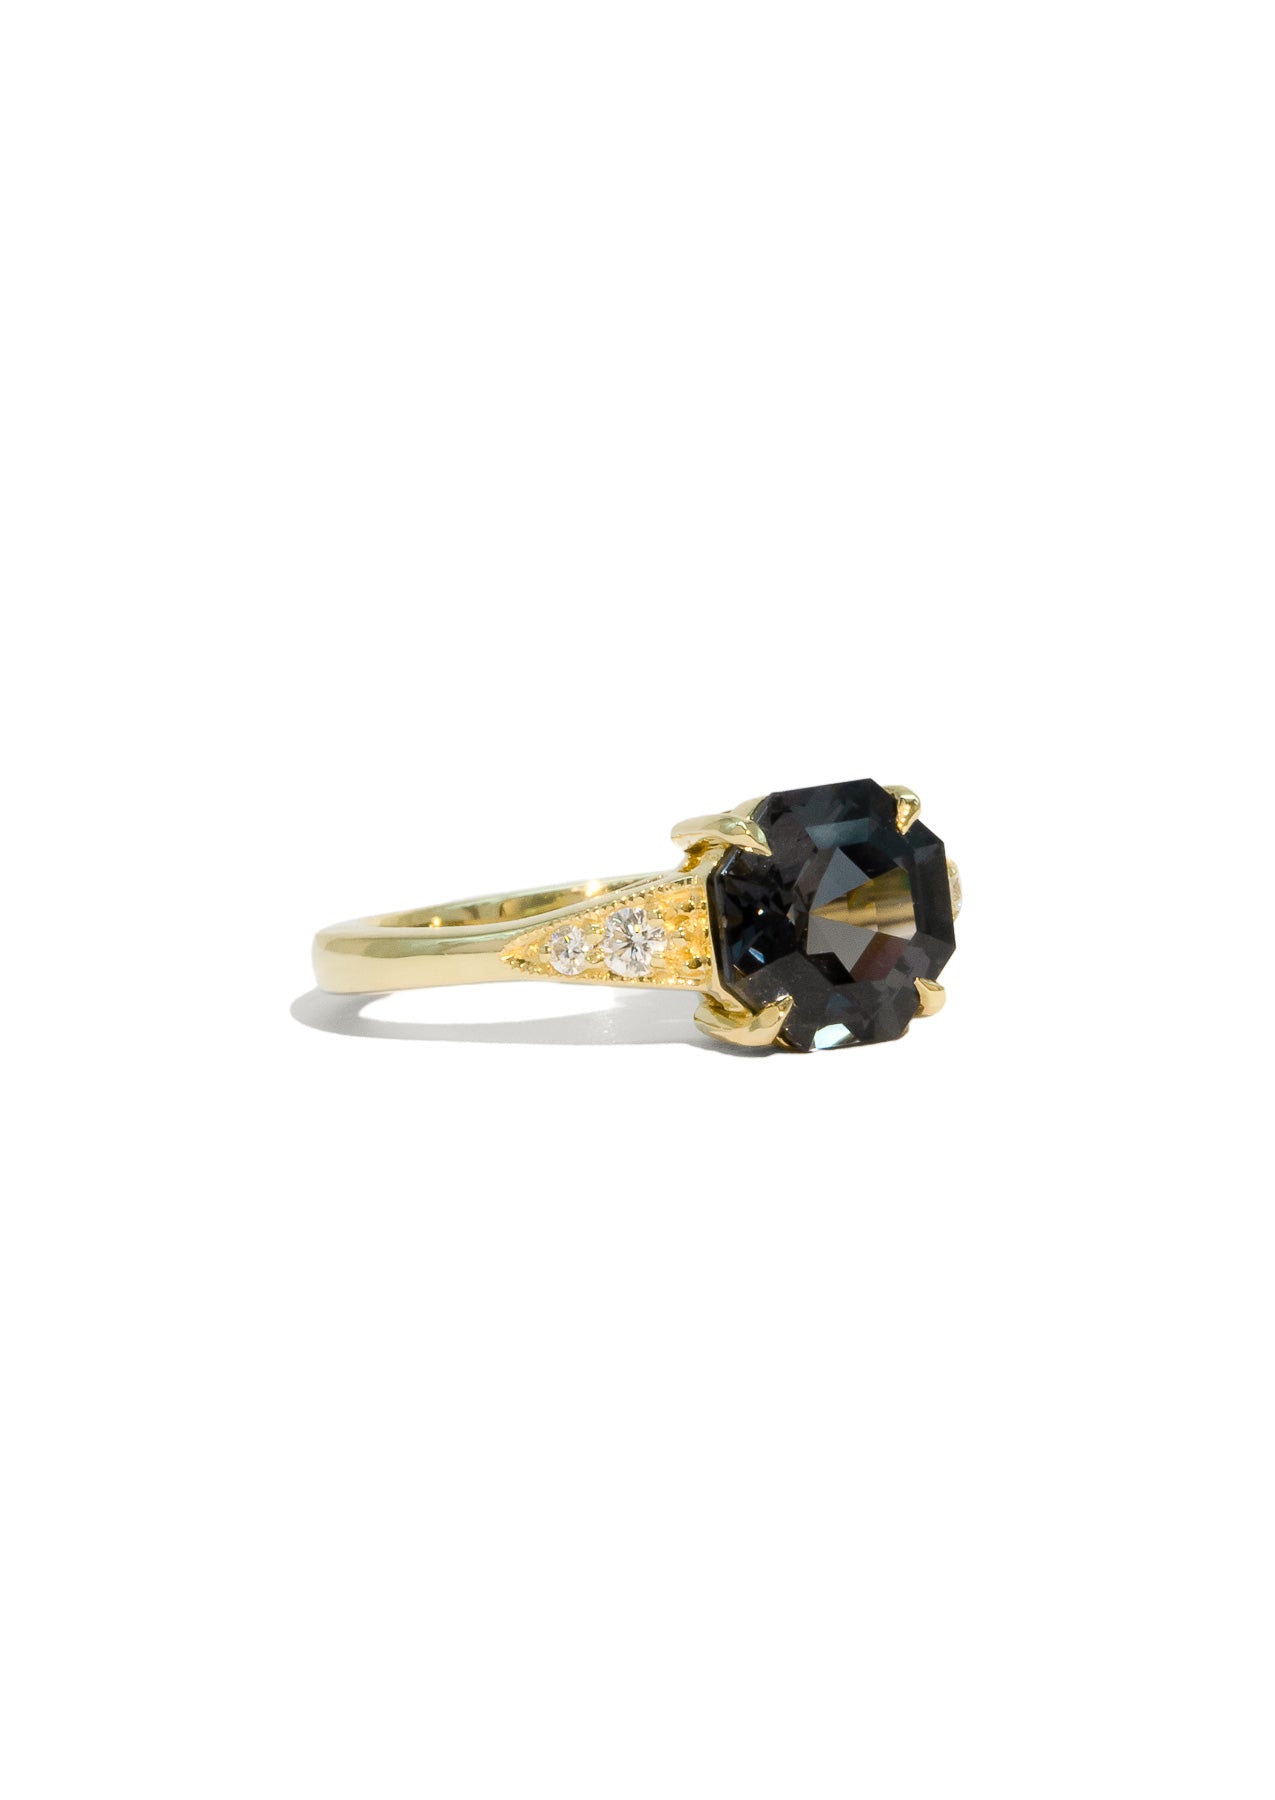 The Kitty Ring with 2.54ct Spinel